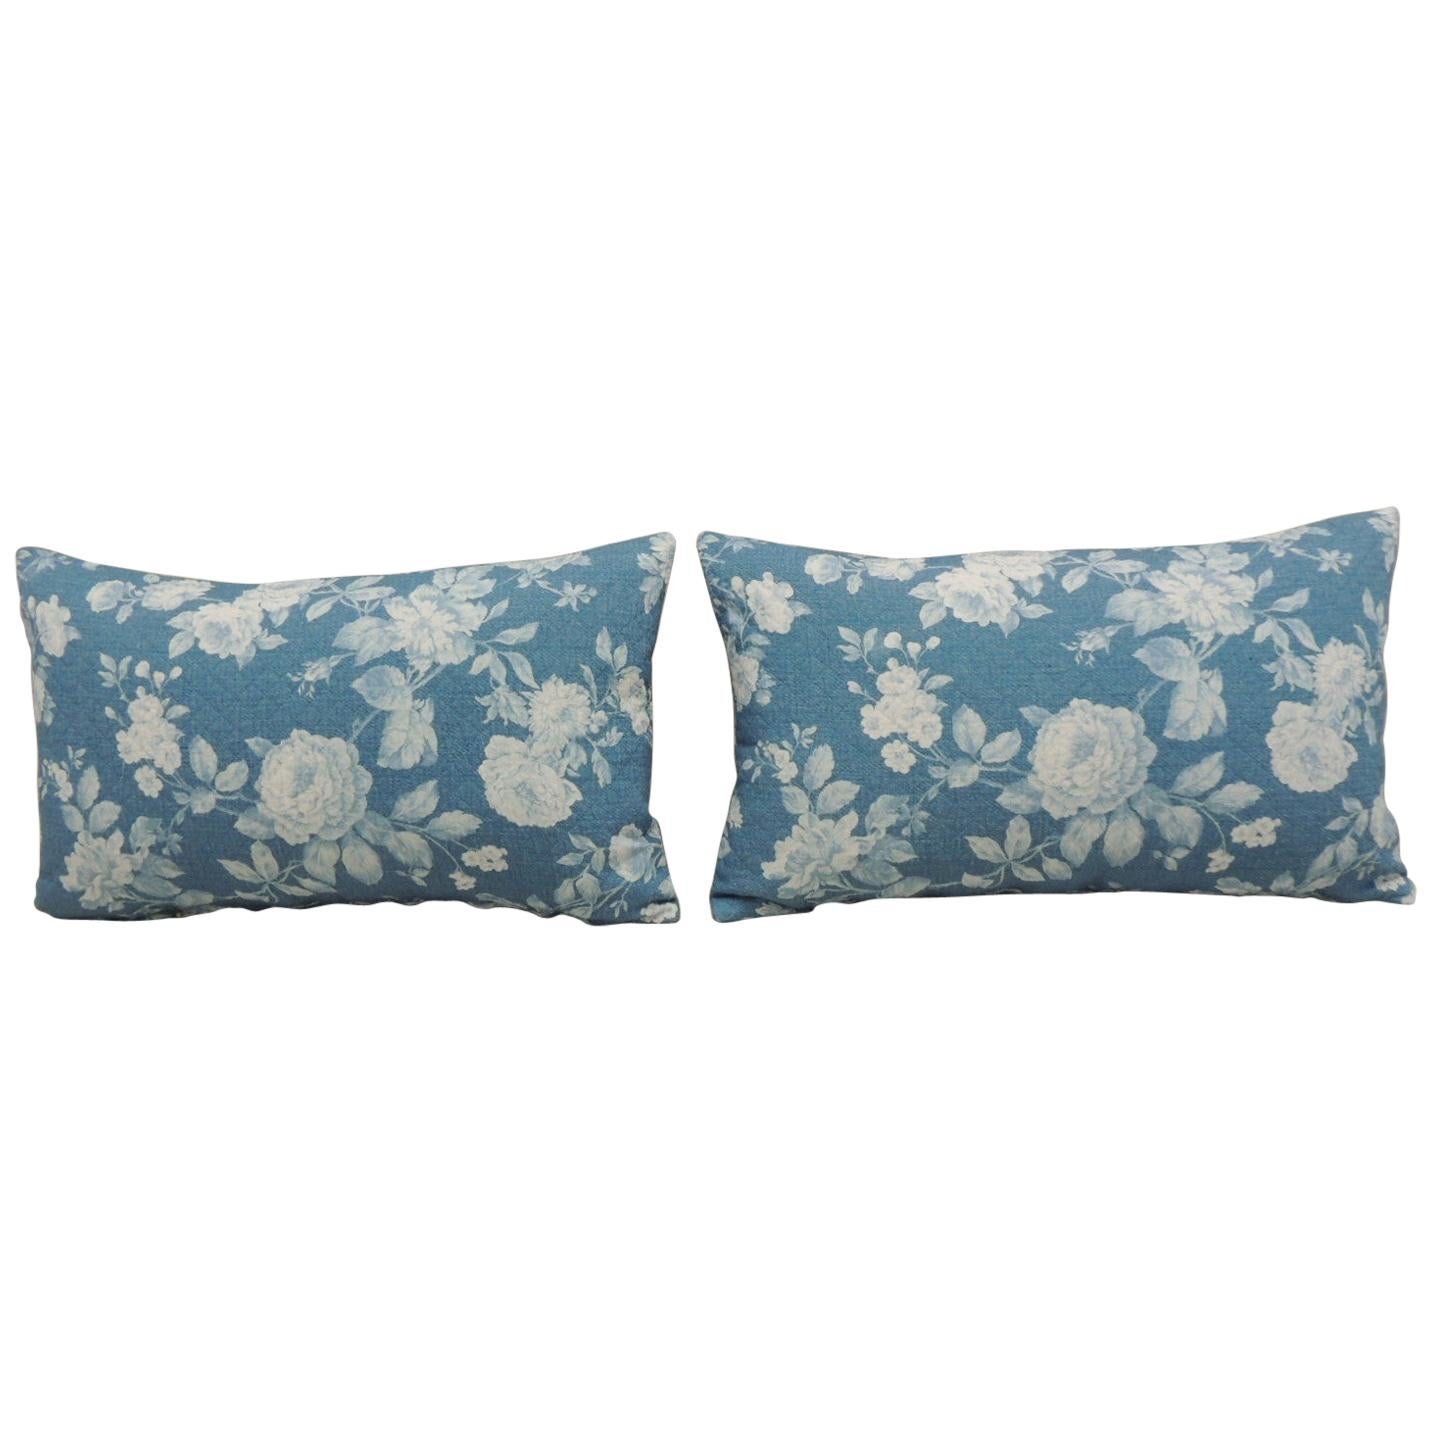 Pair of Modern Blue and White Quilted Cotton Floral Decorative Lumbar Pillows